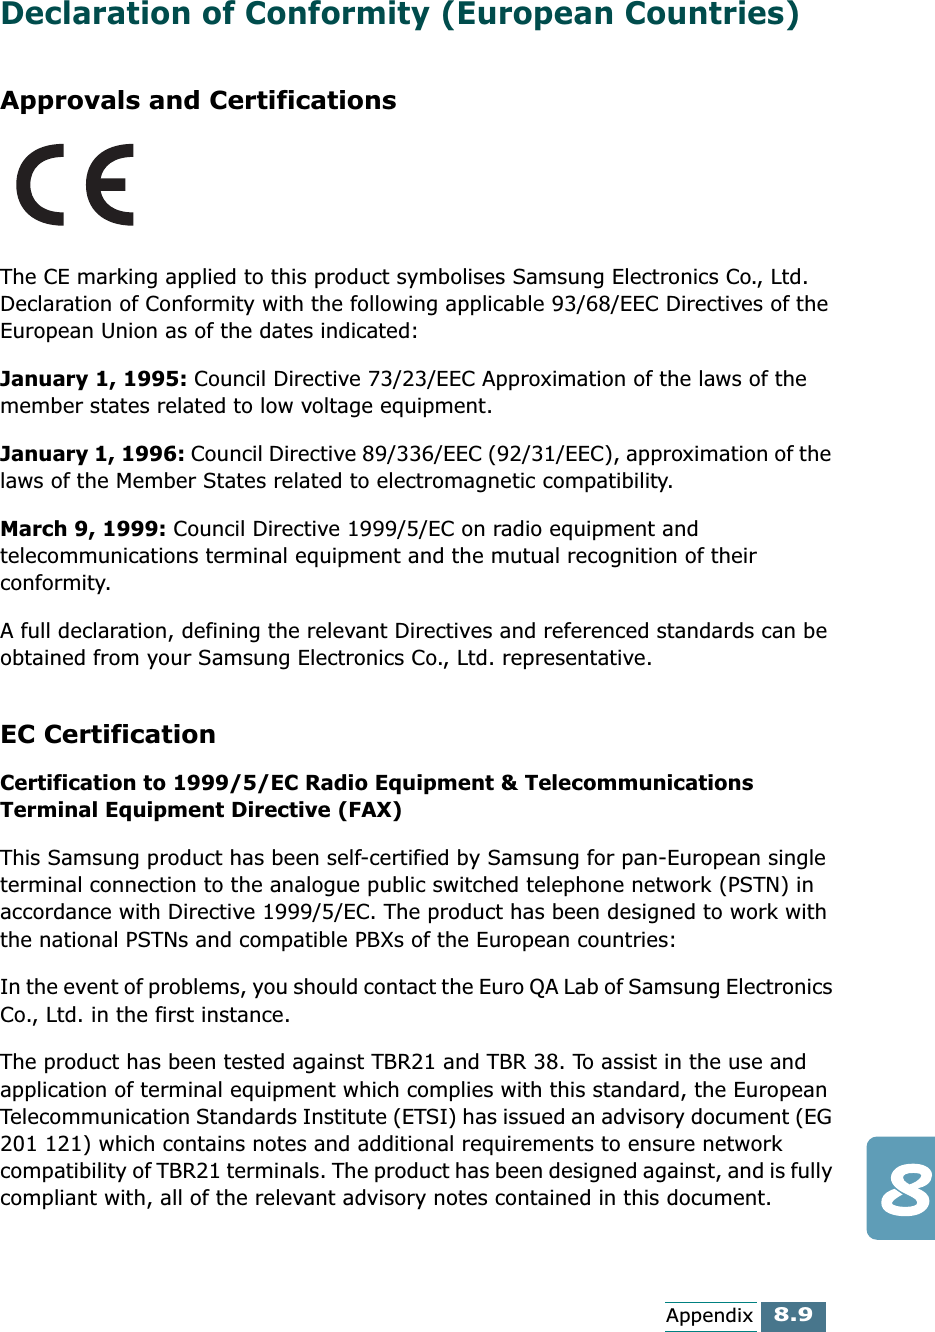 8.9AppendixDeclaration of Conformity (European Countries)Approvals and CertificationsThe CE marking applied to this product symbolises Samsung Electronics Co., Ltd. Declaration of Conformity with the following applicable 93/68/EEC Directives of the European Union as of the dates indicated:January 1, 1995: Council Directive 73/23/EEC Approximation of the laws of the member states related to low voltage equipment.January 1, 1996: Council Directive 89/336/EEC (92/31/EEC), approximation of the laws of the Member States related to electromagnetic compatibility.March 9, 1999: Council Directive 1999/5/EC on radio equipment and telecommunications terminal equipment and the mutual recognition of their conformity.A full declaration, defining the relevant Directives and referenced standards can be obtained from your Samsung Electronics Co., Ltd. representative.EC CertificationCertification to 1999/5/EC Radio Equipment &amp; Telecommunications Terminal Equipment Directive (FAX)This Samsung product has been self-certified by Samsung for pan-European single terminal connection to the analogue public switched telephone network (PSTN) in accordance with Directive 1999/5/EC. The product has been designed to work with the national PSTNs and compatible PBXs of the European countries:In the event of problems, you should contact the Euro QA Lab of Samsung Electronics Co., Ltd. in the first instance.The product has been tested against TBR21 and TBR 38. To assist in the use and application of terminal equipment which complies with this standard, the European Telecommunication Standards Institute (ETSI) has issued an advisory document (EG 201 121) which contains notes and additional requirements to ensure network compatibility of TBR21 terminals. The product has been designed against, and is fully compliant with, all of the relevant advisory notes contained in this document. 